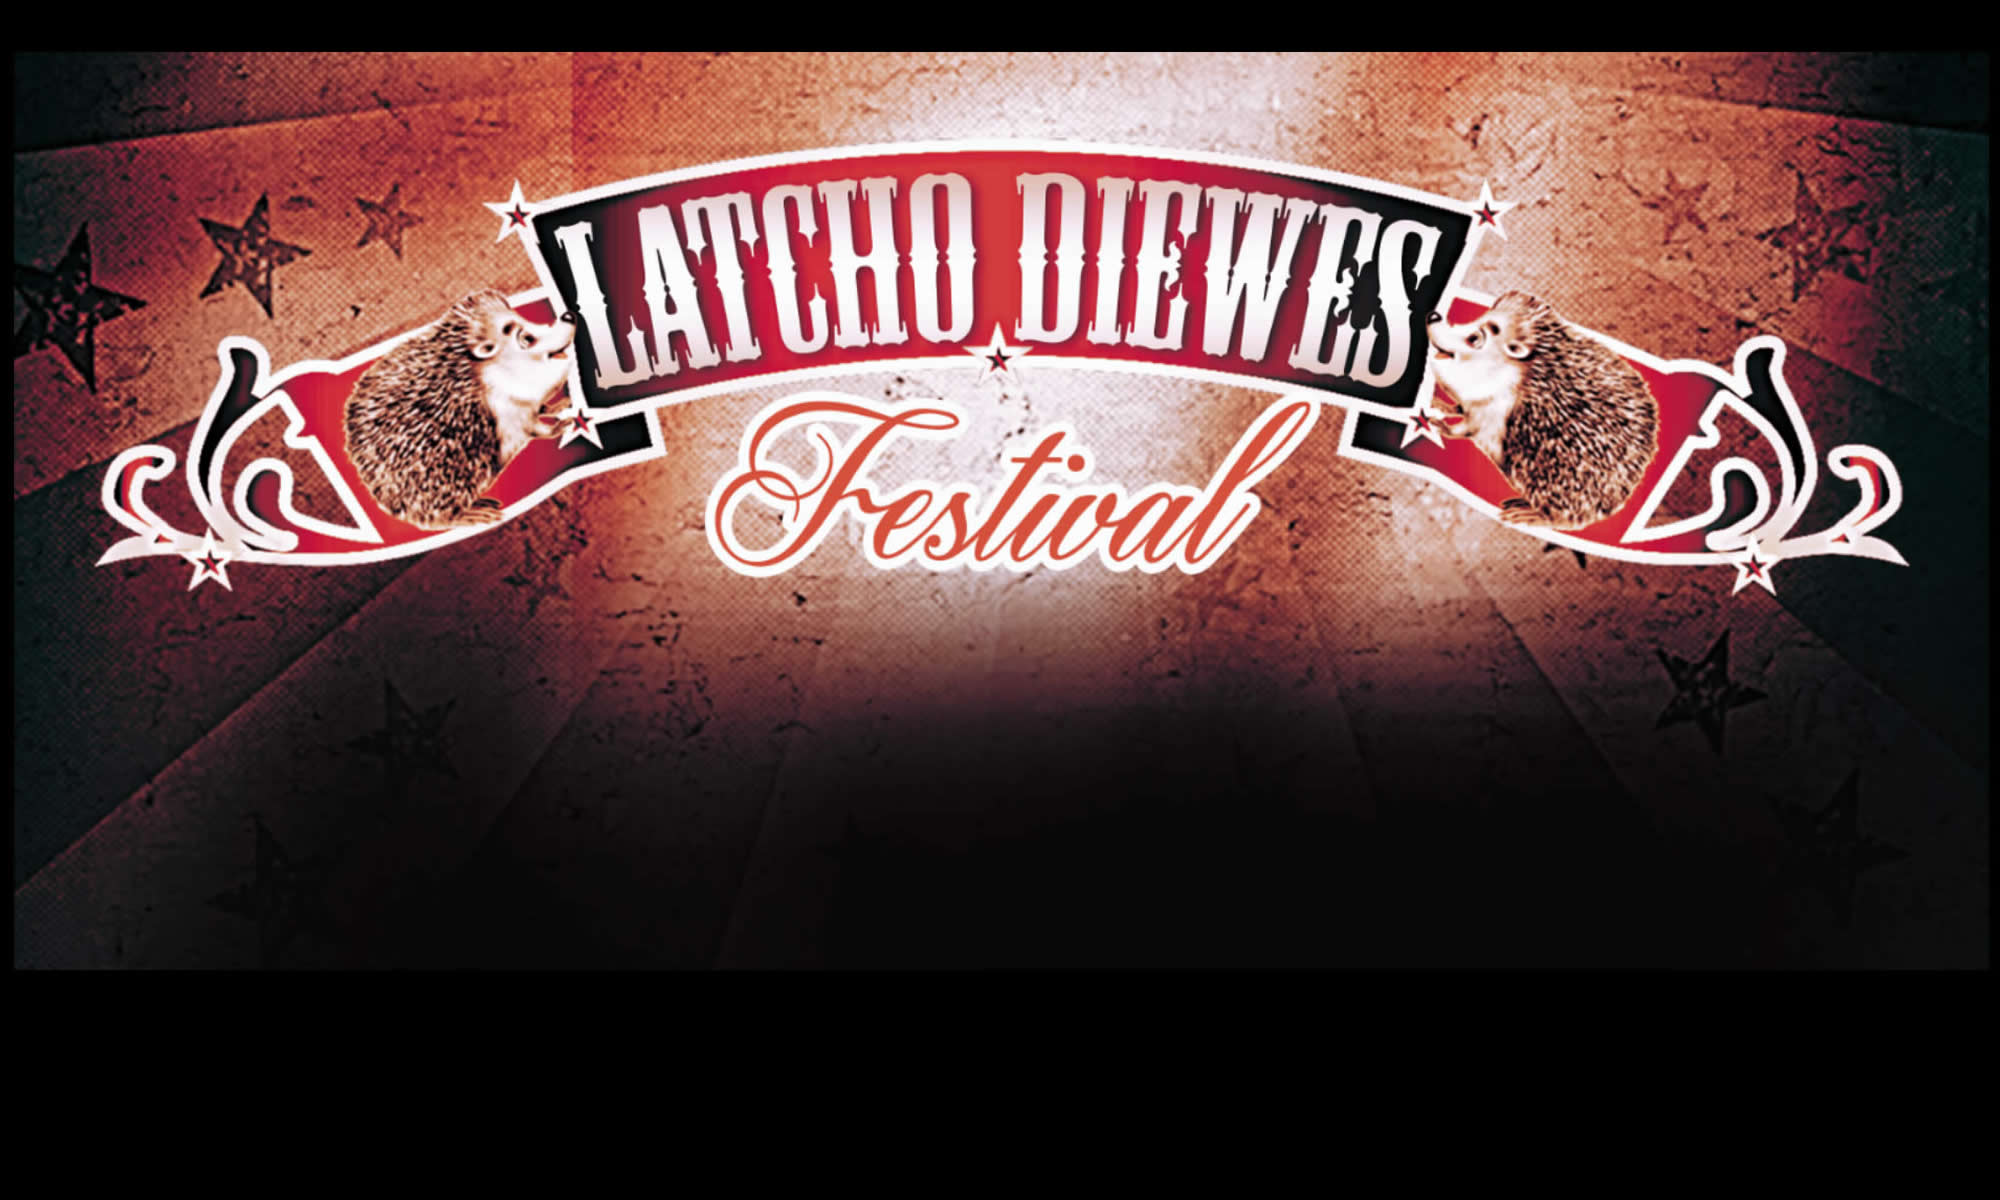 Latcho Diewes